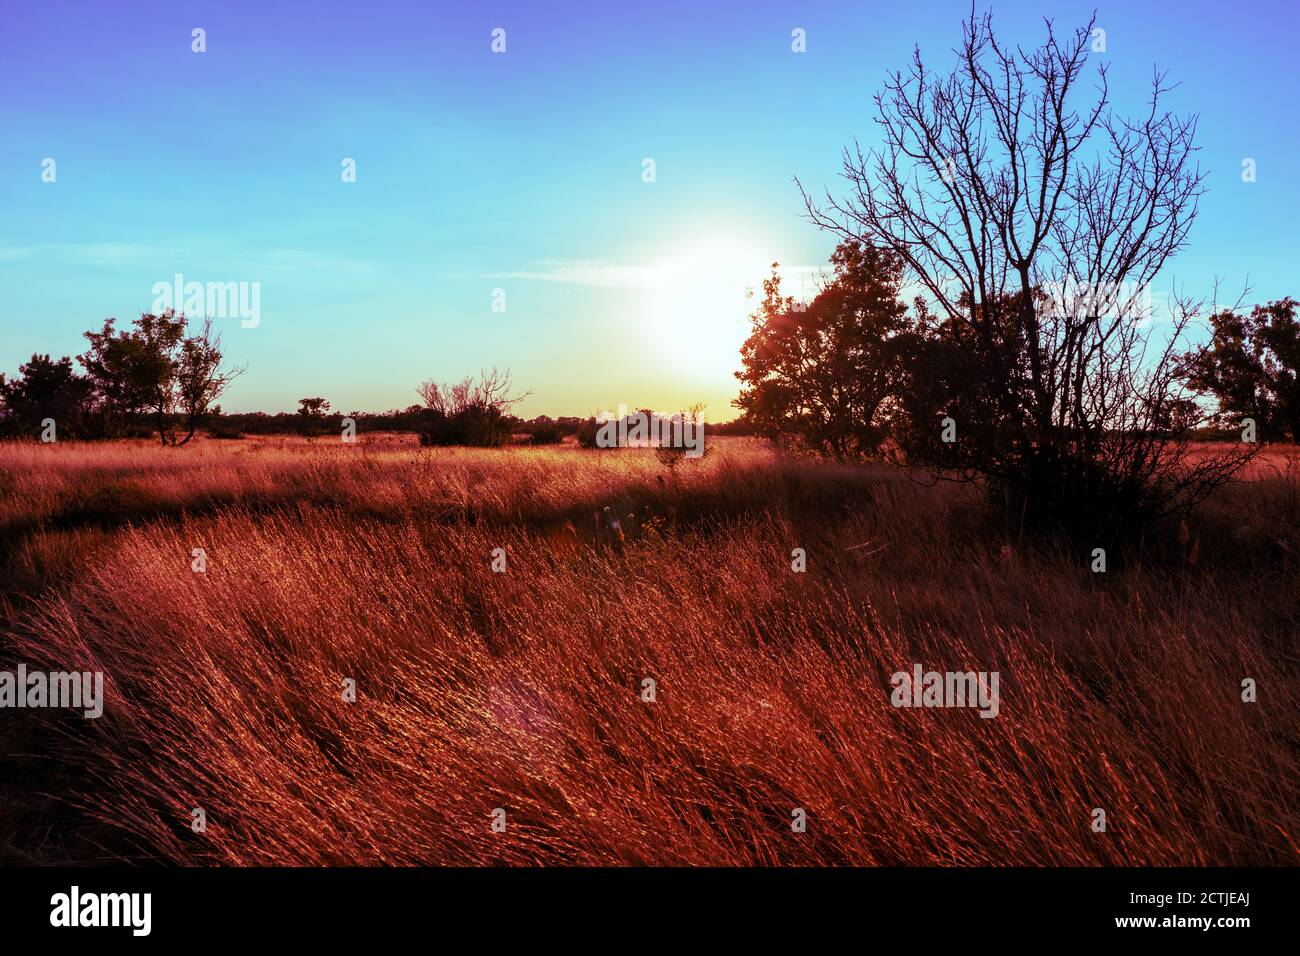 Sunset in rural area over the wild lawn with dry grass shining in sun rays and dark trees silhouettes in red and blue vibrant colors. Color graded Stock Photo